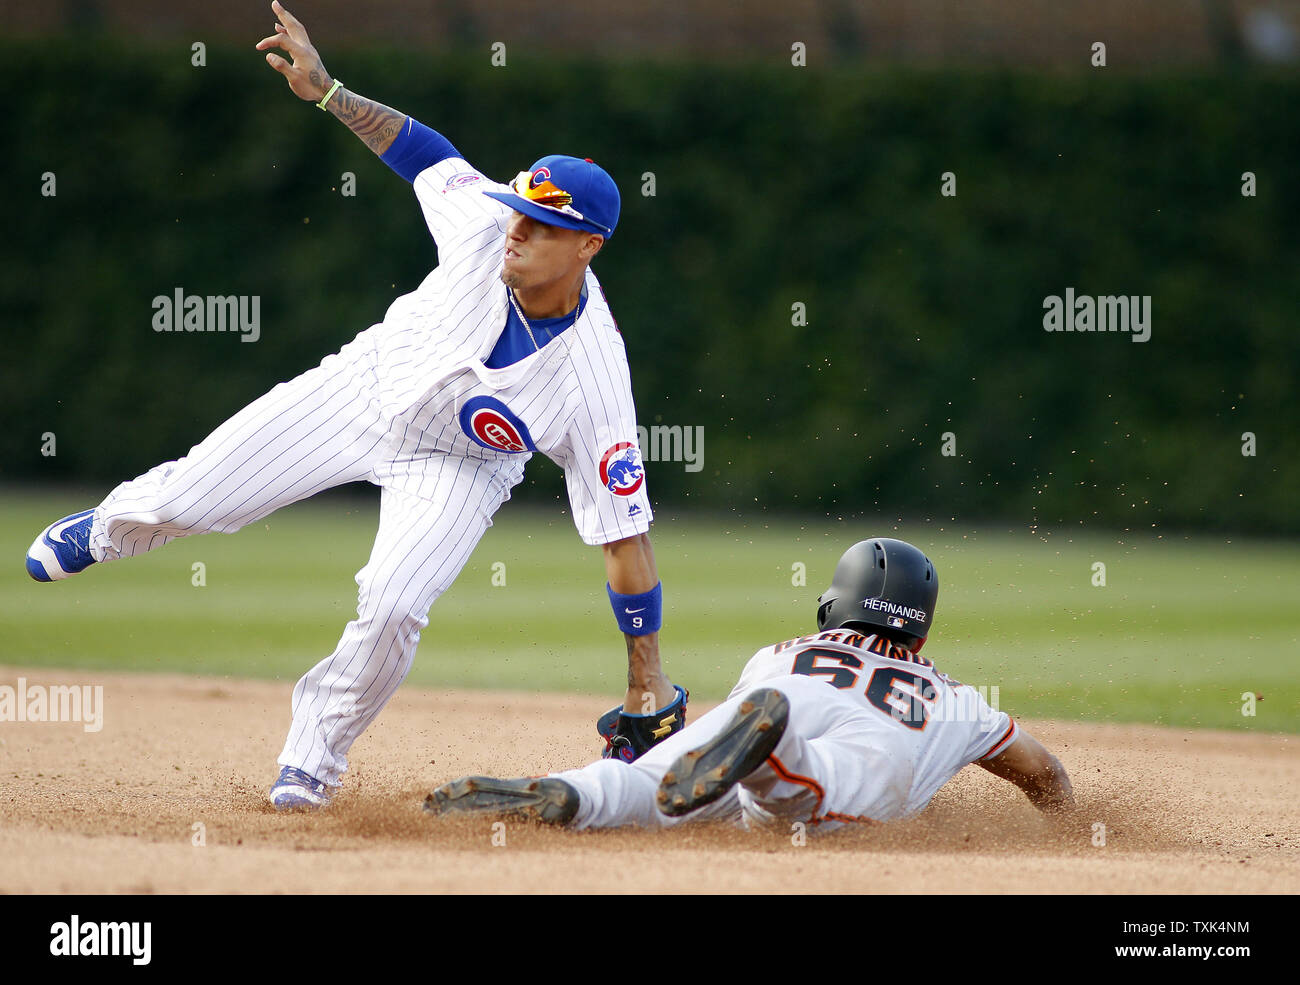 Chicago Cubs shortstop Javier Baez (L) tags out San Francisco Giants Gorkys Hernandez on a steal attempt of second base in the 12th inning of their game on September 4, 2016 in Chicago. The Cubs defeated the Giants 3-2 in 13 innings. Photo by Frank Polich/UPI Stock Photo